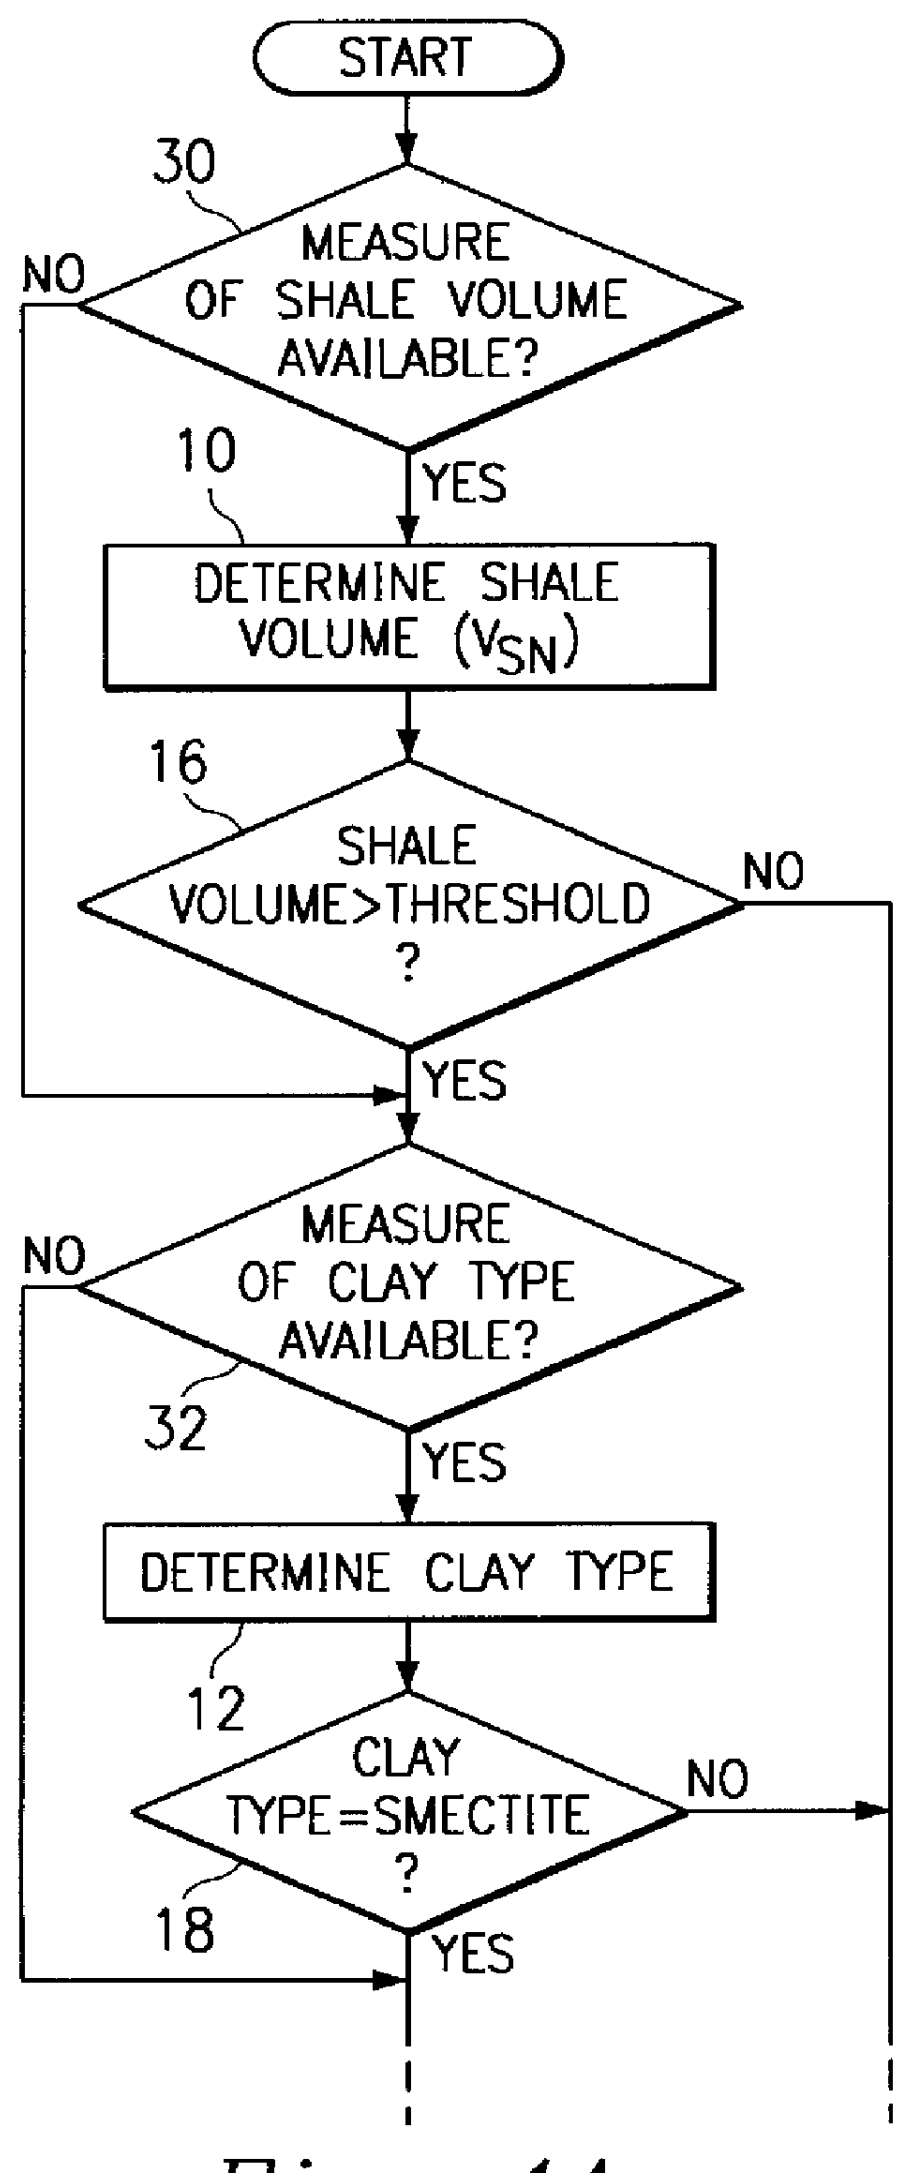 Method and apparatus for quantifying shale plasticity from well logs